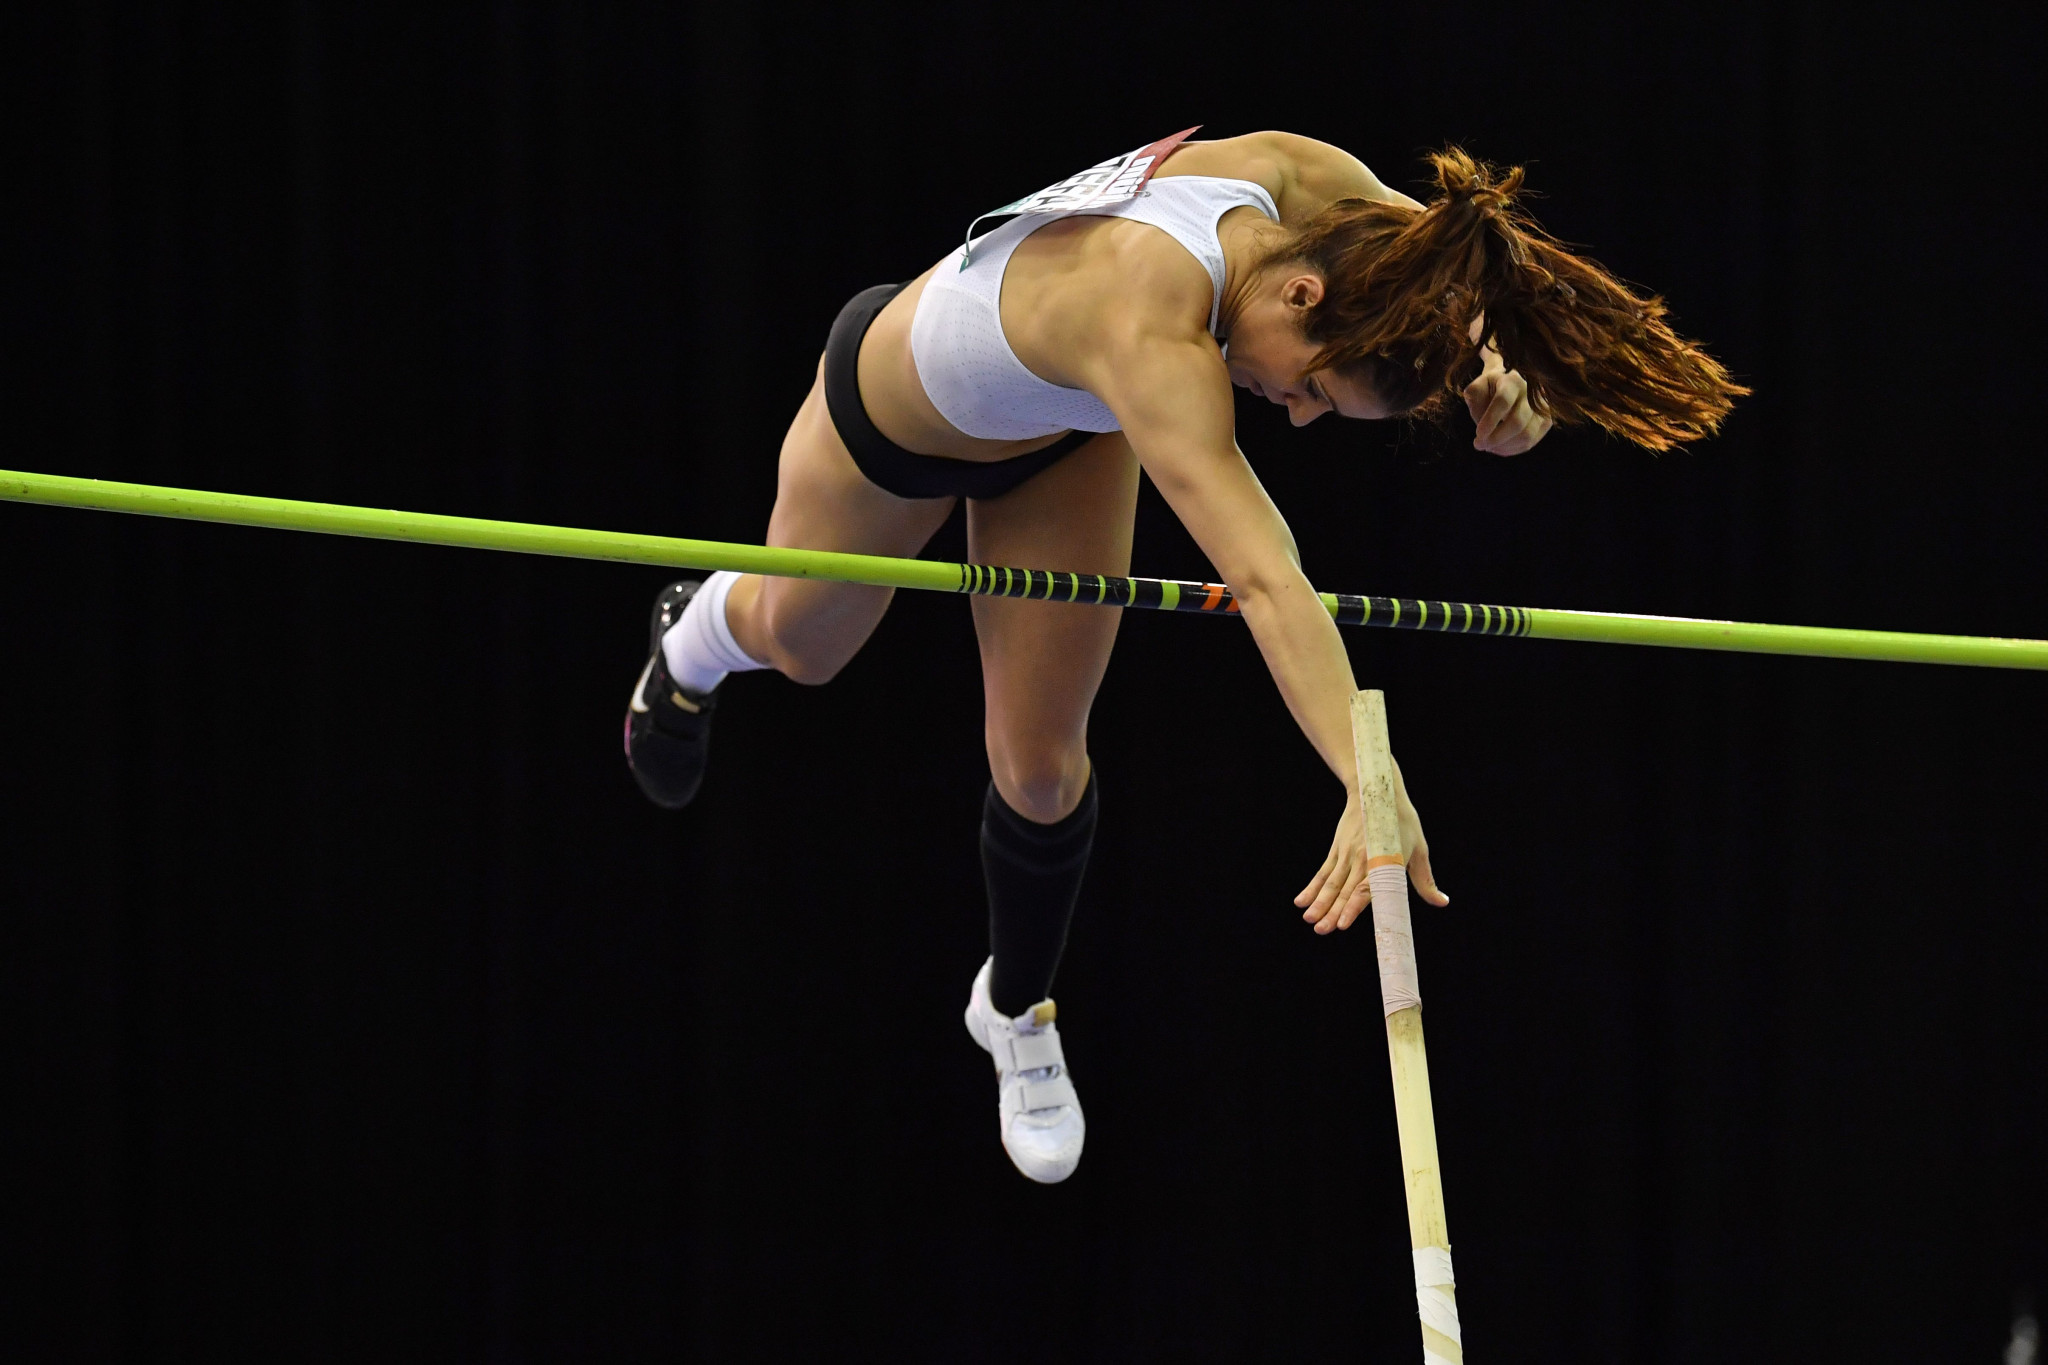 Greece's Katerina Stefanidi is in contention to win the women's pole vault title ©Getty Images